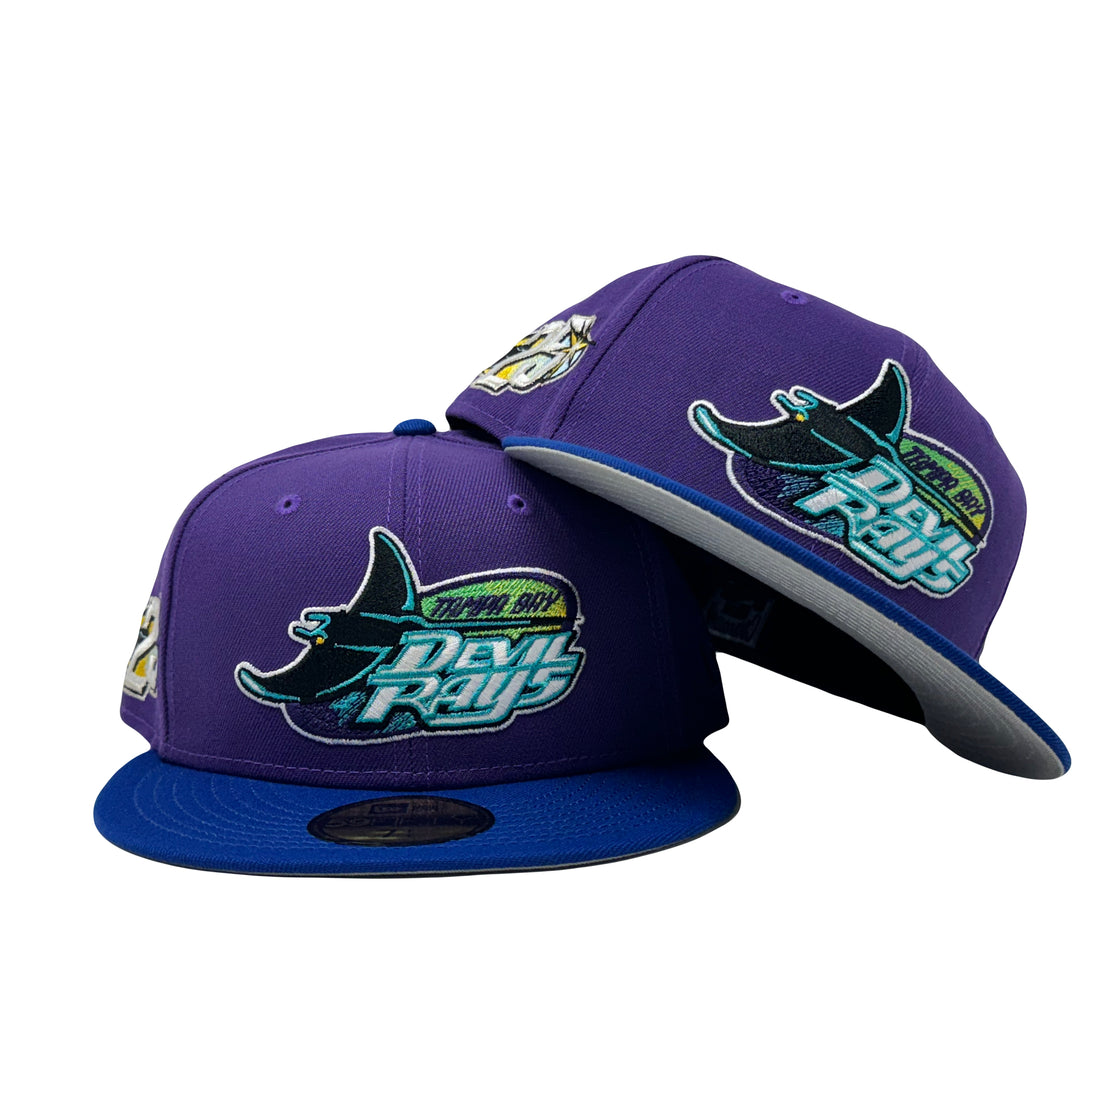 Tampa Bay Devil Rays 25th Anniversary Sparkling Grape Royal New Era Fitted Hat